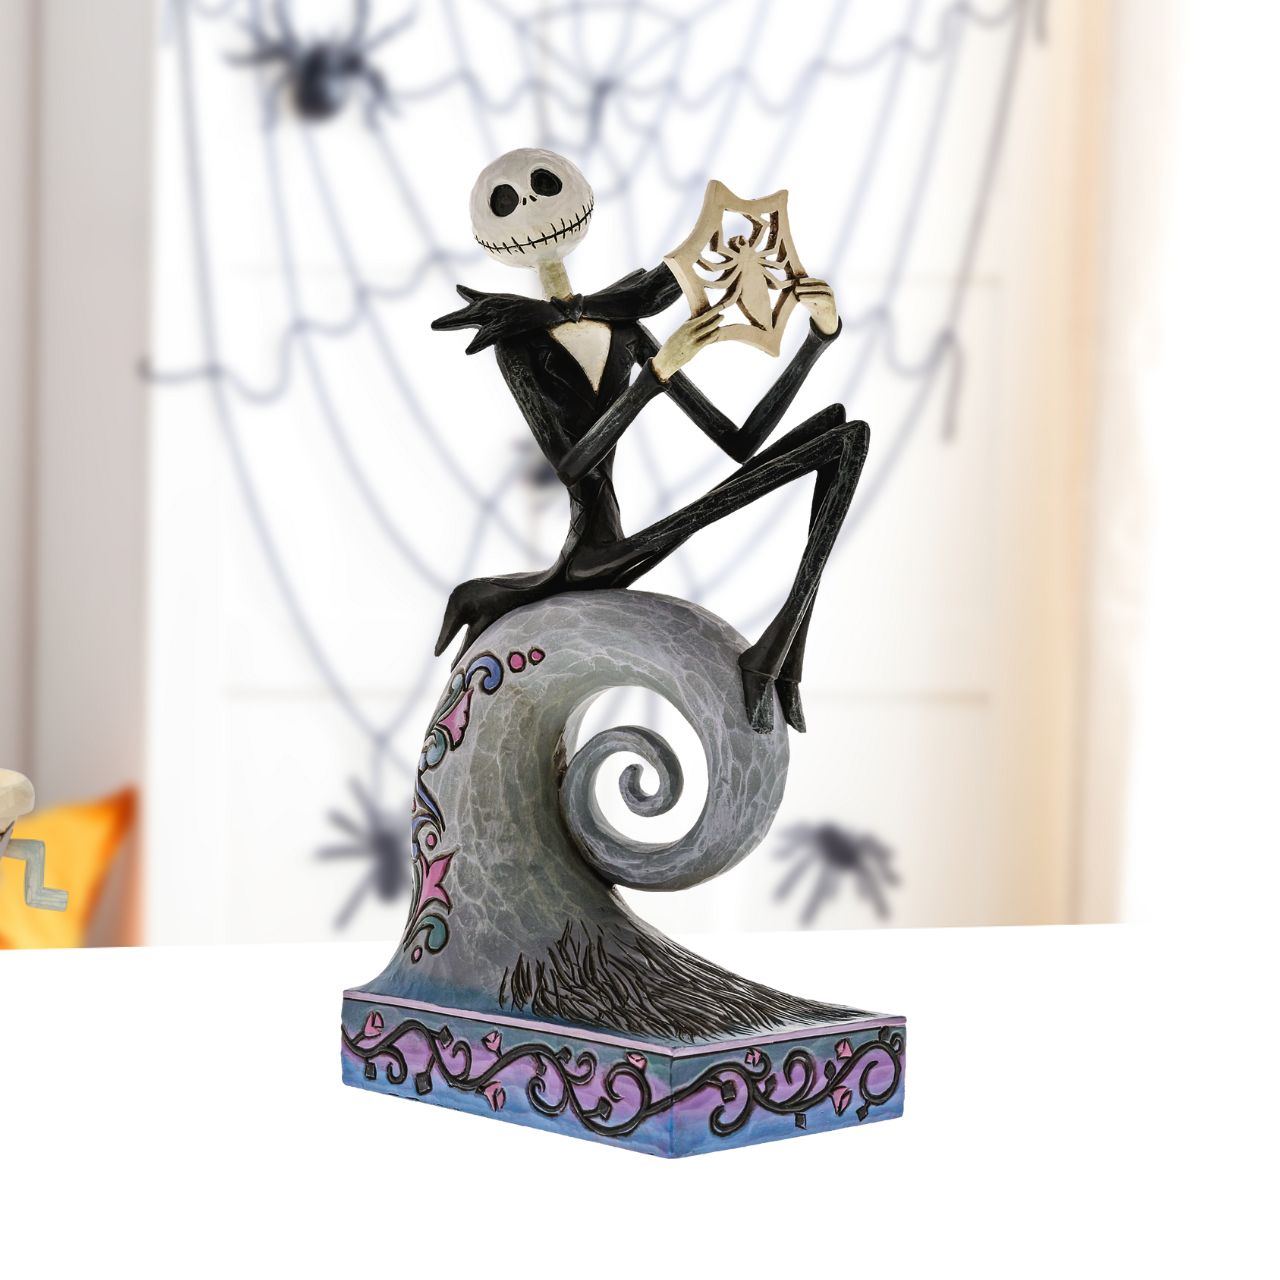 Disney Traditions by Jim Shore "What's This?" - Jack Skellington Figurine  In this captivating sculpture, Jim Shore features the King of Pumpkin Town discovering just how fun Christmas can be| In this Nightmare Before Christmas figurine you can almost hear Jack Skellington singing as he uncovers the delight of the holiday.